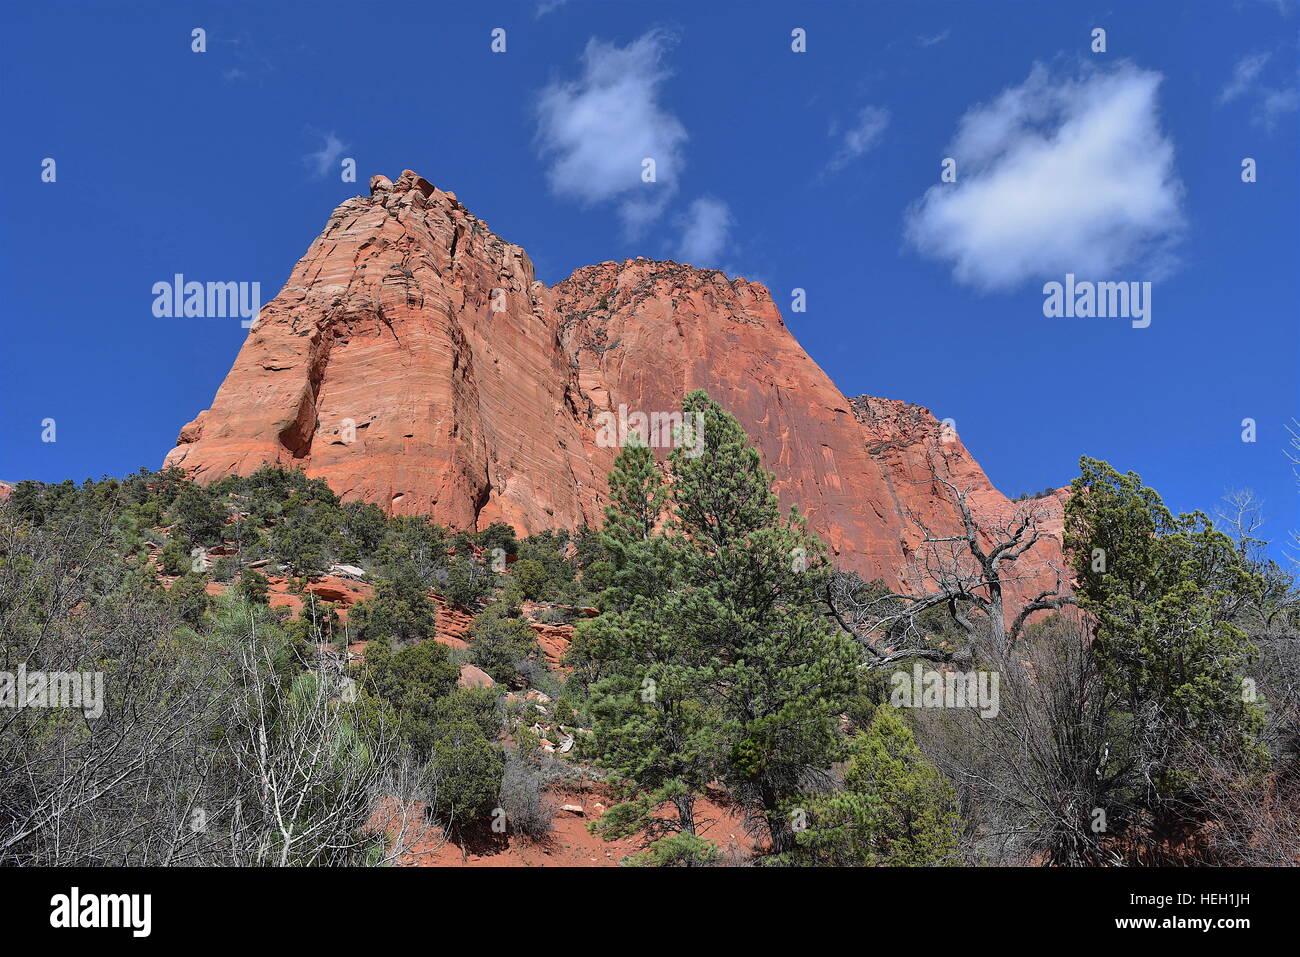 View from the Taylor Creek Trail, Kolob Canyons, Zion National Park Stock Photo